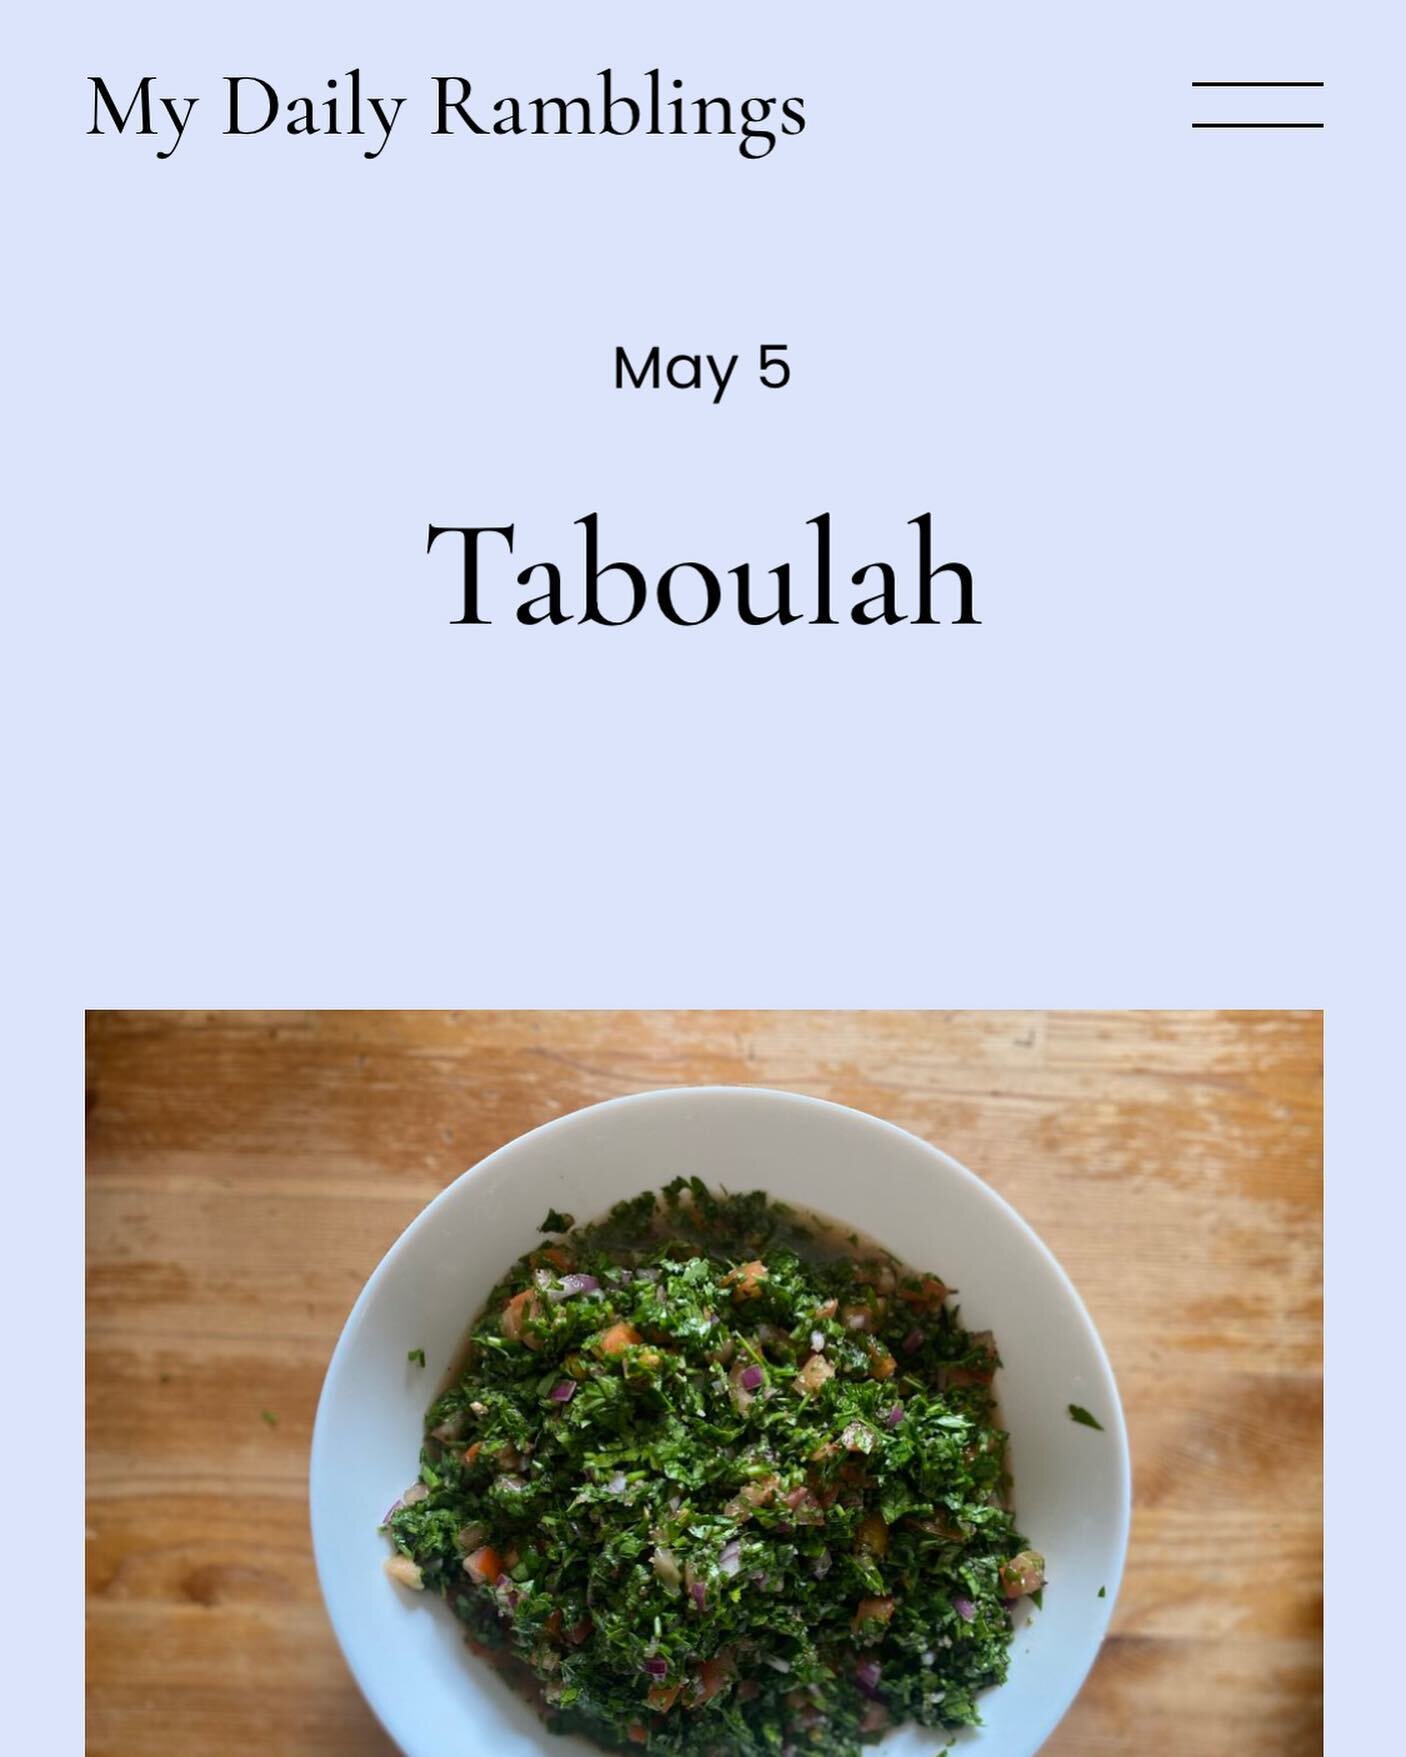 Taboulah recipe is on my blog now! Link in my bio. #taboulah #tabouleh #taboulahrecipe #recipe #blog #blogger #mydailyramblings